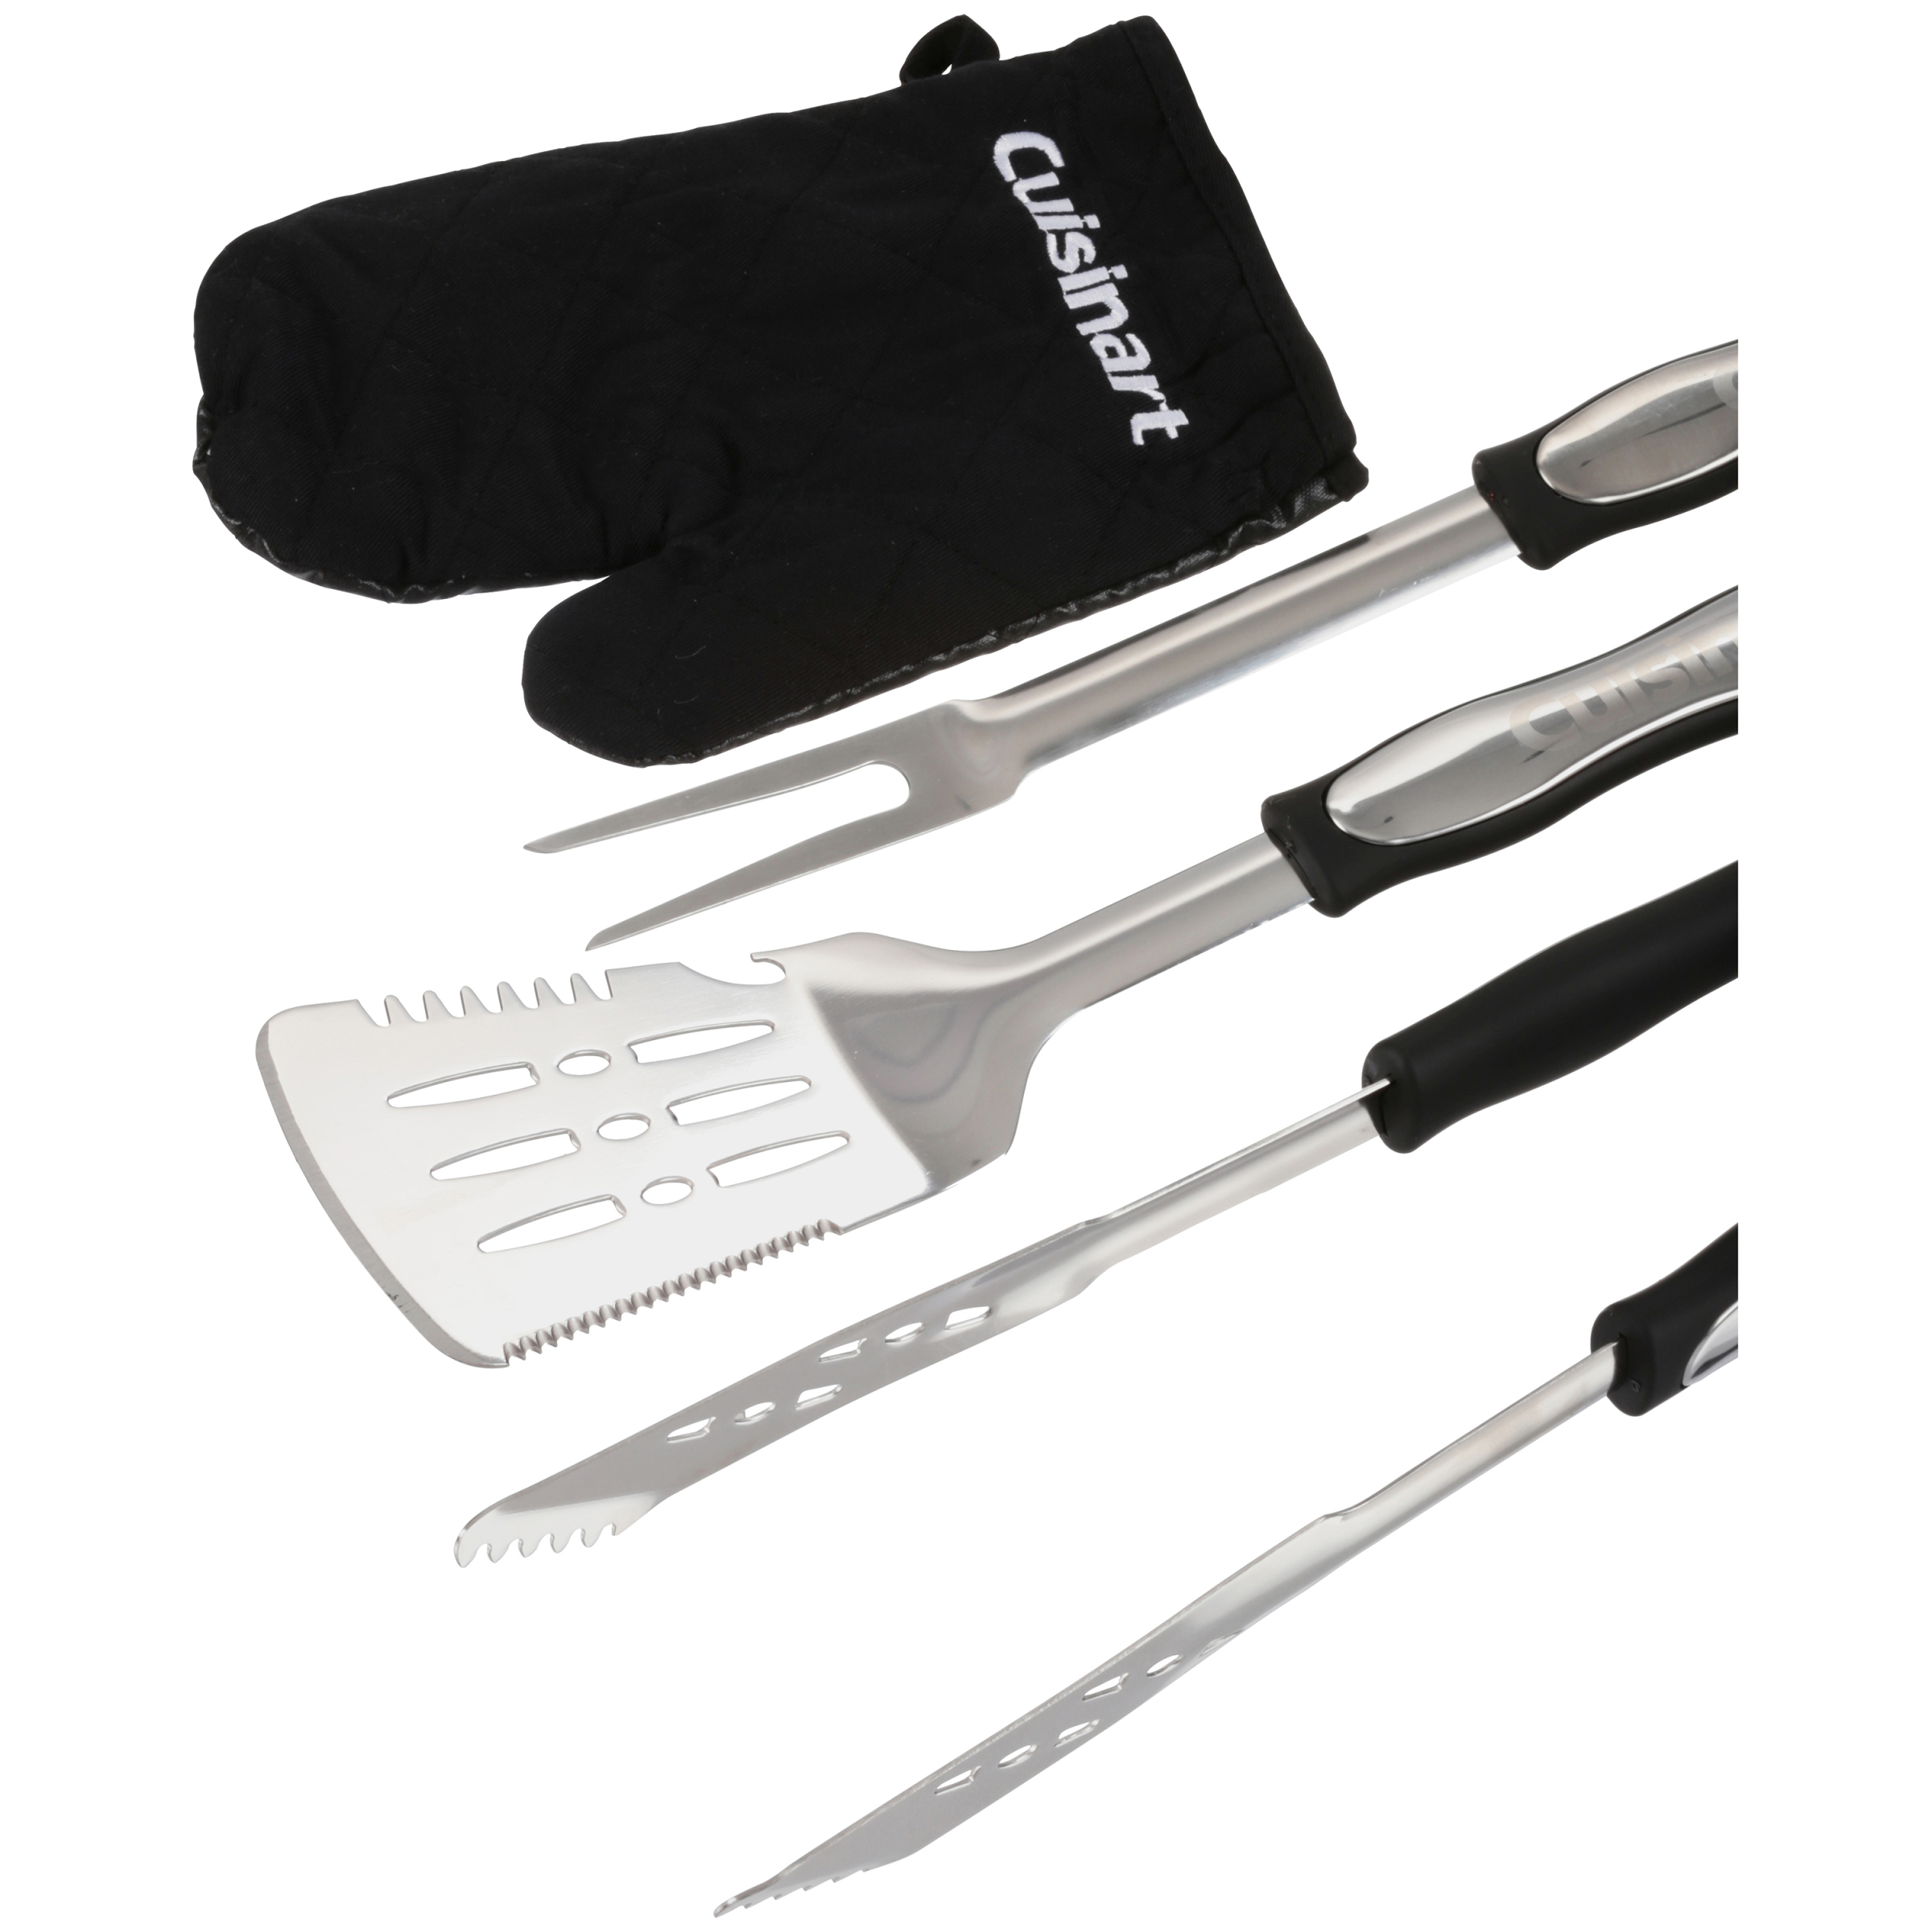 Cuisinart® 3 Piece Grilling Tool Set with Grill Glove - Includes Tongs, Spatula, Grill Fork and a BONUS Grill Glove - image 2 of 2